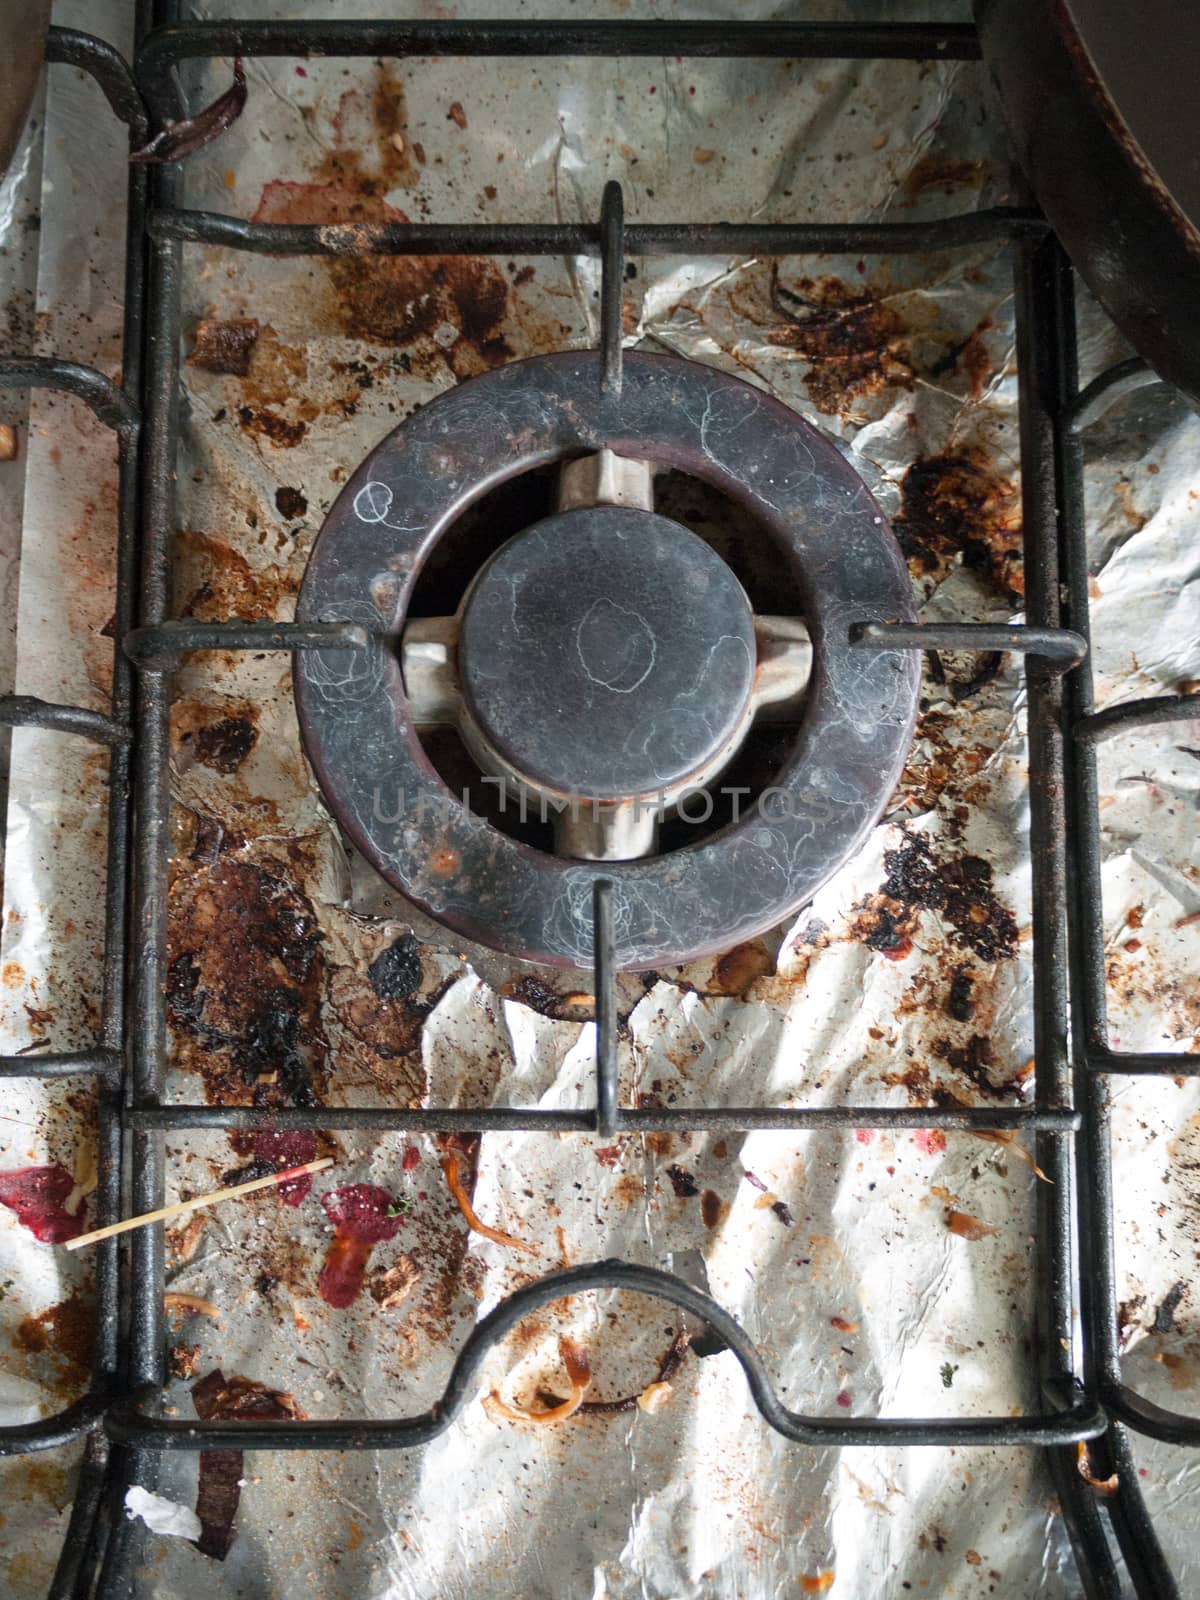 The Dirty and Grimy and Rusted Top of Gas Cooker Hob with Bits of Foil Underneath the Metal with Bits of Food and High Detaul Shining with Cracks and Blemishes and Stains Used for Cooking with Pans in UK in Kitchen